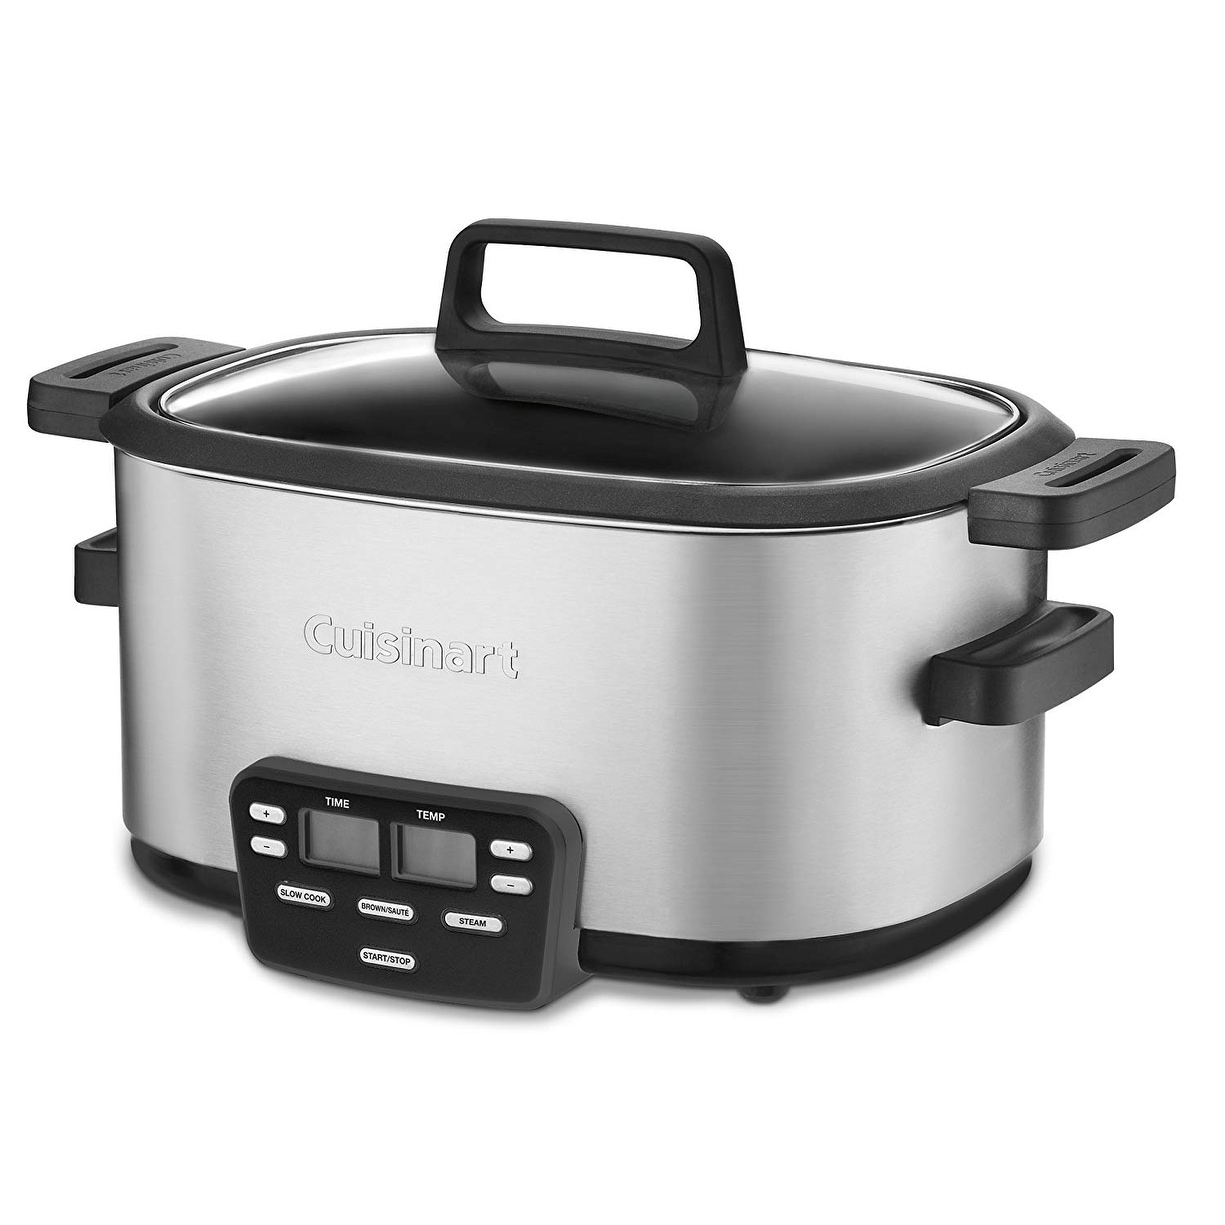 https://ak1.ostkcdn.com/images/products/is/images/direct/cdcd2909030018d8847510eca195f0e18709ea4f/Cuisinart-MSC-600-3-In-1-Cook-Central-6-Quart-Multi-Cooker%3A-Slow-Cooker%2C-Brown-Saute%2C-Steamer%2C-Stainless.jpg